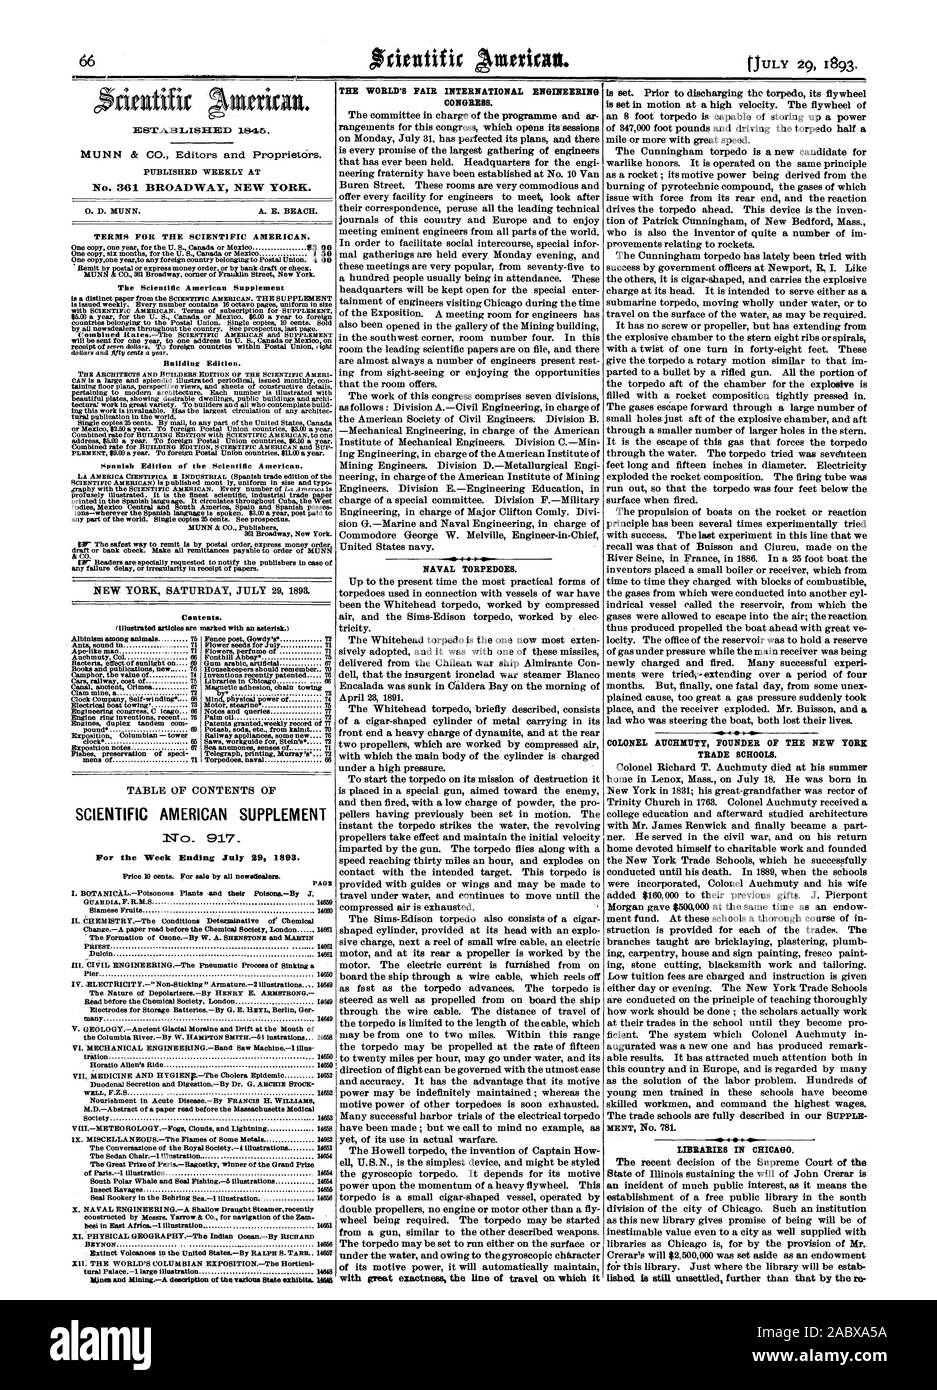 PUBLISHED WEEKLY AT No. 361 BROADWAY NEW YORK. 0. D. MUNN. A. E. BEACH. TERMS FOR THE SCIENTIFIC AMERICAN. SCIENTIFIC AMERICAN SUPPLEMENT No. 917. For the Week Ending July 29 1893. THE WORLD'S FAIR INTERNATIONAL ENGINEERING CONGRESS. NAVAL TORPEDOES. with great exactness the line of travel ou which it COLONEL AUCHRIITY POUNDER OF THE NEW YORK TRADE SCHOOLS. LIBRARIES IN CHICAGO. ICS'I`A-131.ISFEID 1845., 1893-07-29 Stock Photo